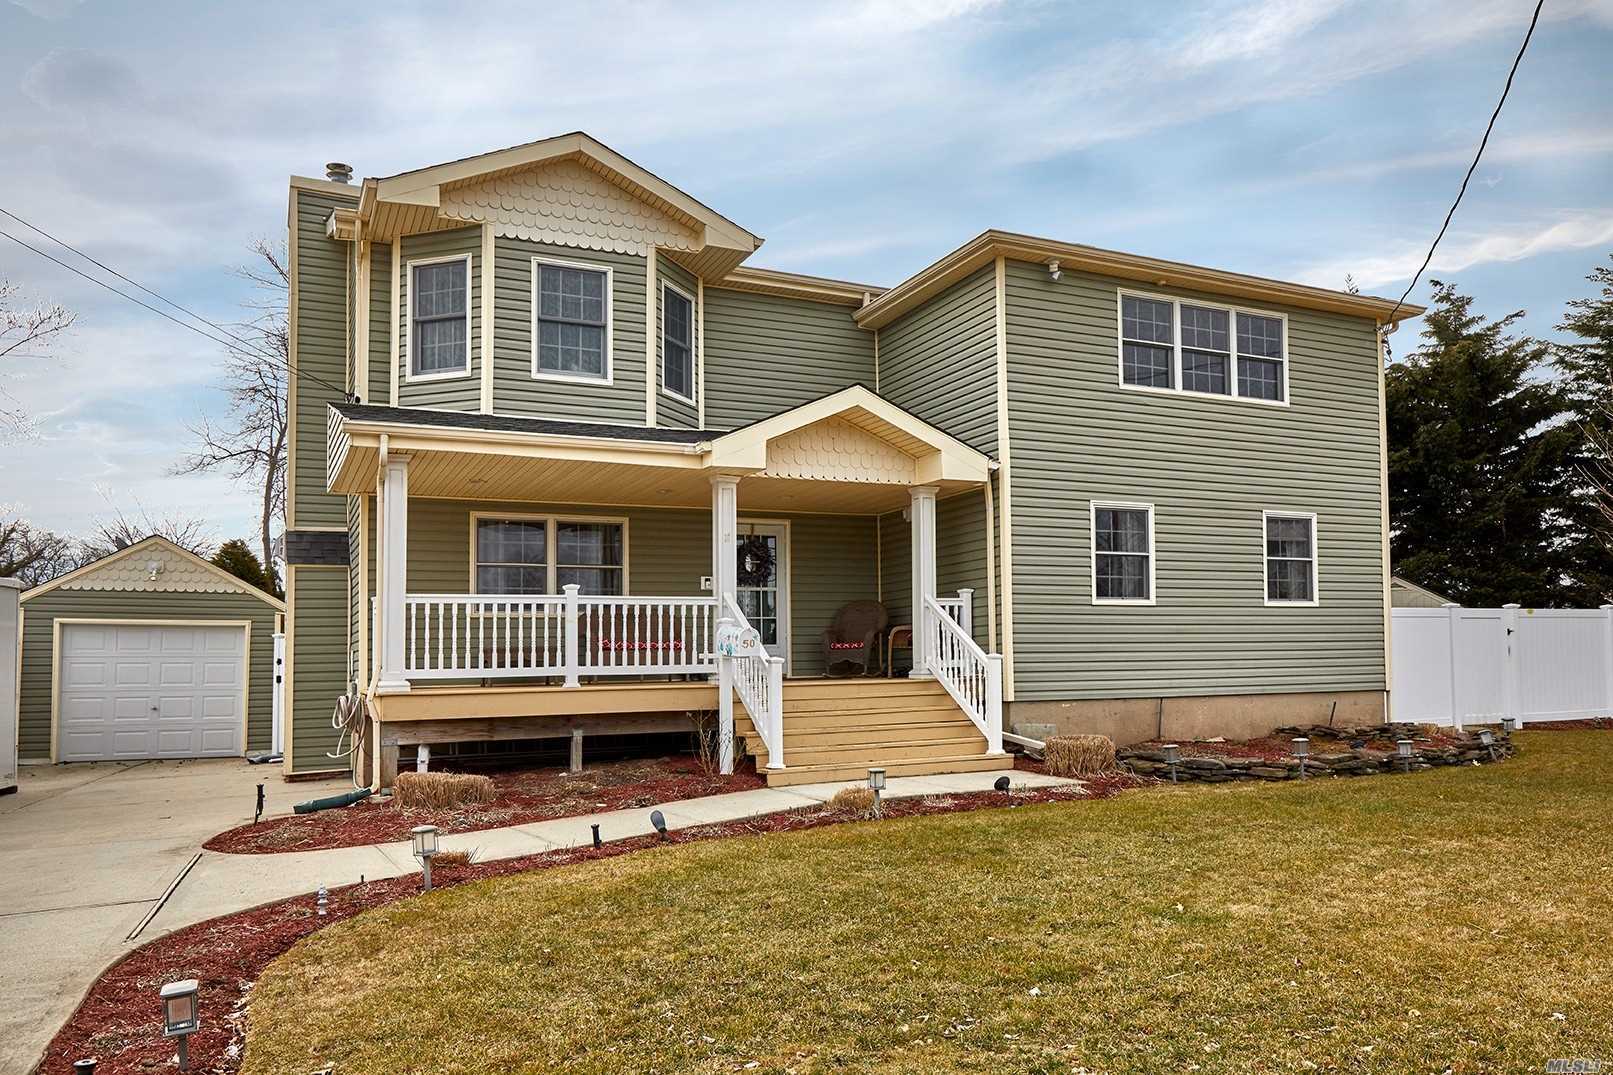 Gorgeous 4 Bdrm, 3 Bath Colonial Offers Gleaming Hardwood Flrs Thruout. 1st Flr Features, EIK with SS applcs, Liv Rm W/Gas Frplc, Den, Full Bath, Bdrm. 2nd Flr, Lg Master Bedrm, Bath With Jacuzzi Tub,  2 Addt&rsquo;l Bedrooms & Full Bath. Full Bsmt, Part Finished, Includes Gas 3 Zone Heat, CAC on 2nd Flr. 30 Year Architectural Roof, 6 Car Driveway, Det Garage, Exquisitely Landscaped Backyard w/Pavers, Perfect For Entertaining, In-ground Sprinklers.Short Distance to LIRR, Argyle Lake & Babylon Village